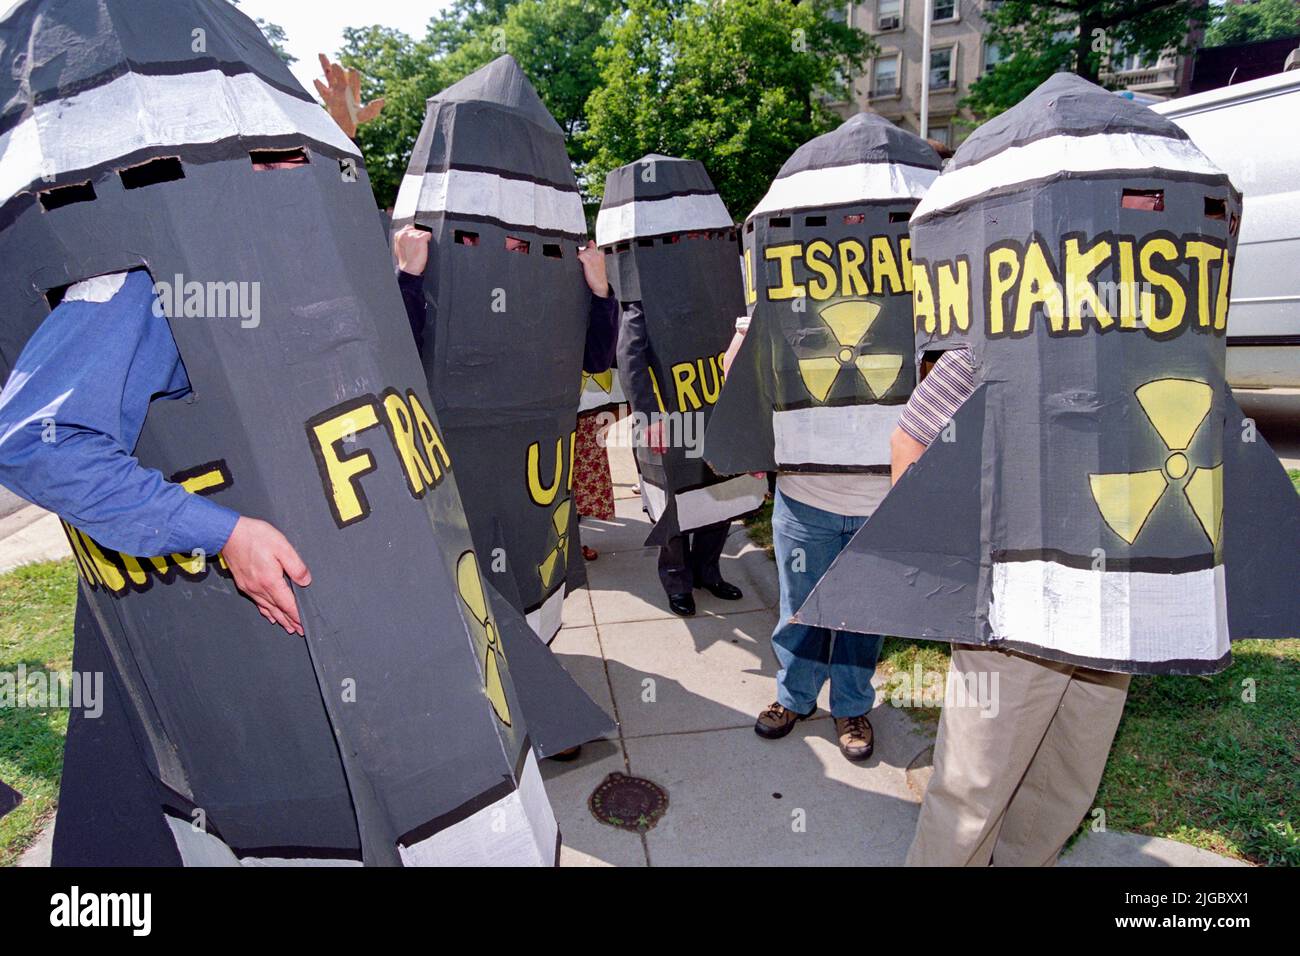 Greenpeace protestors, wearing bomb costumes, rally outside the Embassy of Pakistan, May 28, 1998 in Washington, DC. The protesters called for an end to nuclear arms race which has increased with Pakistan joining nuclear armed nations. Stock Photo